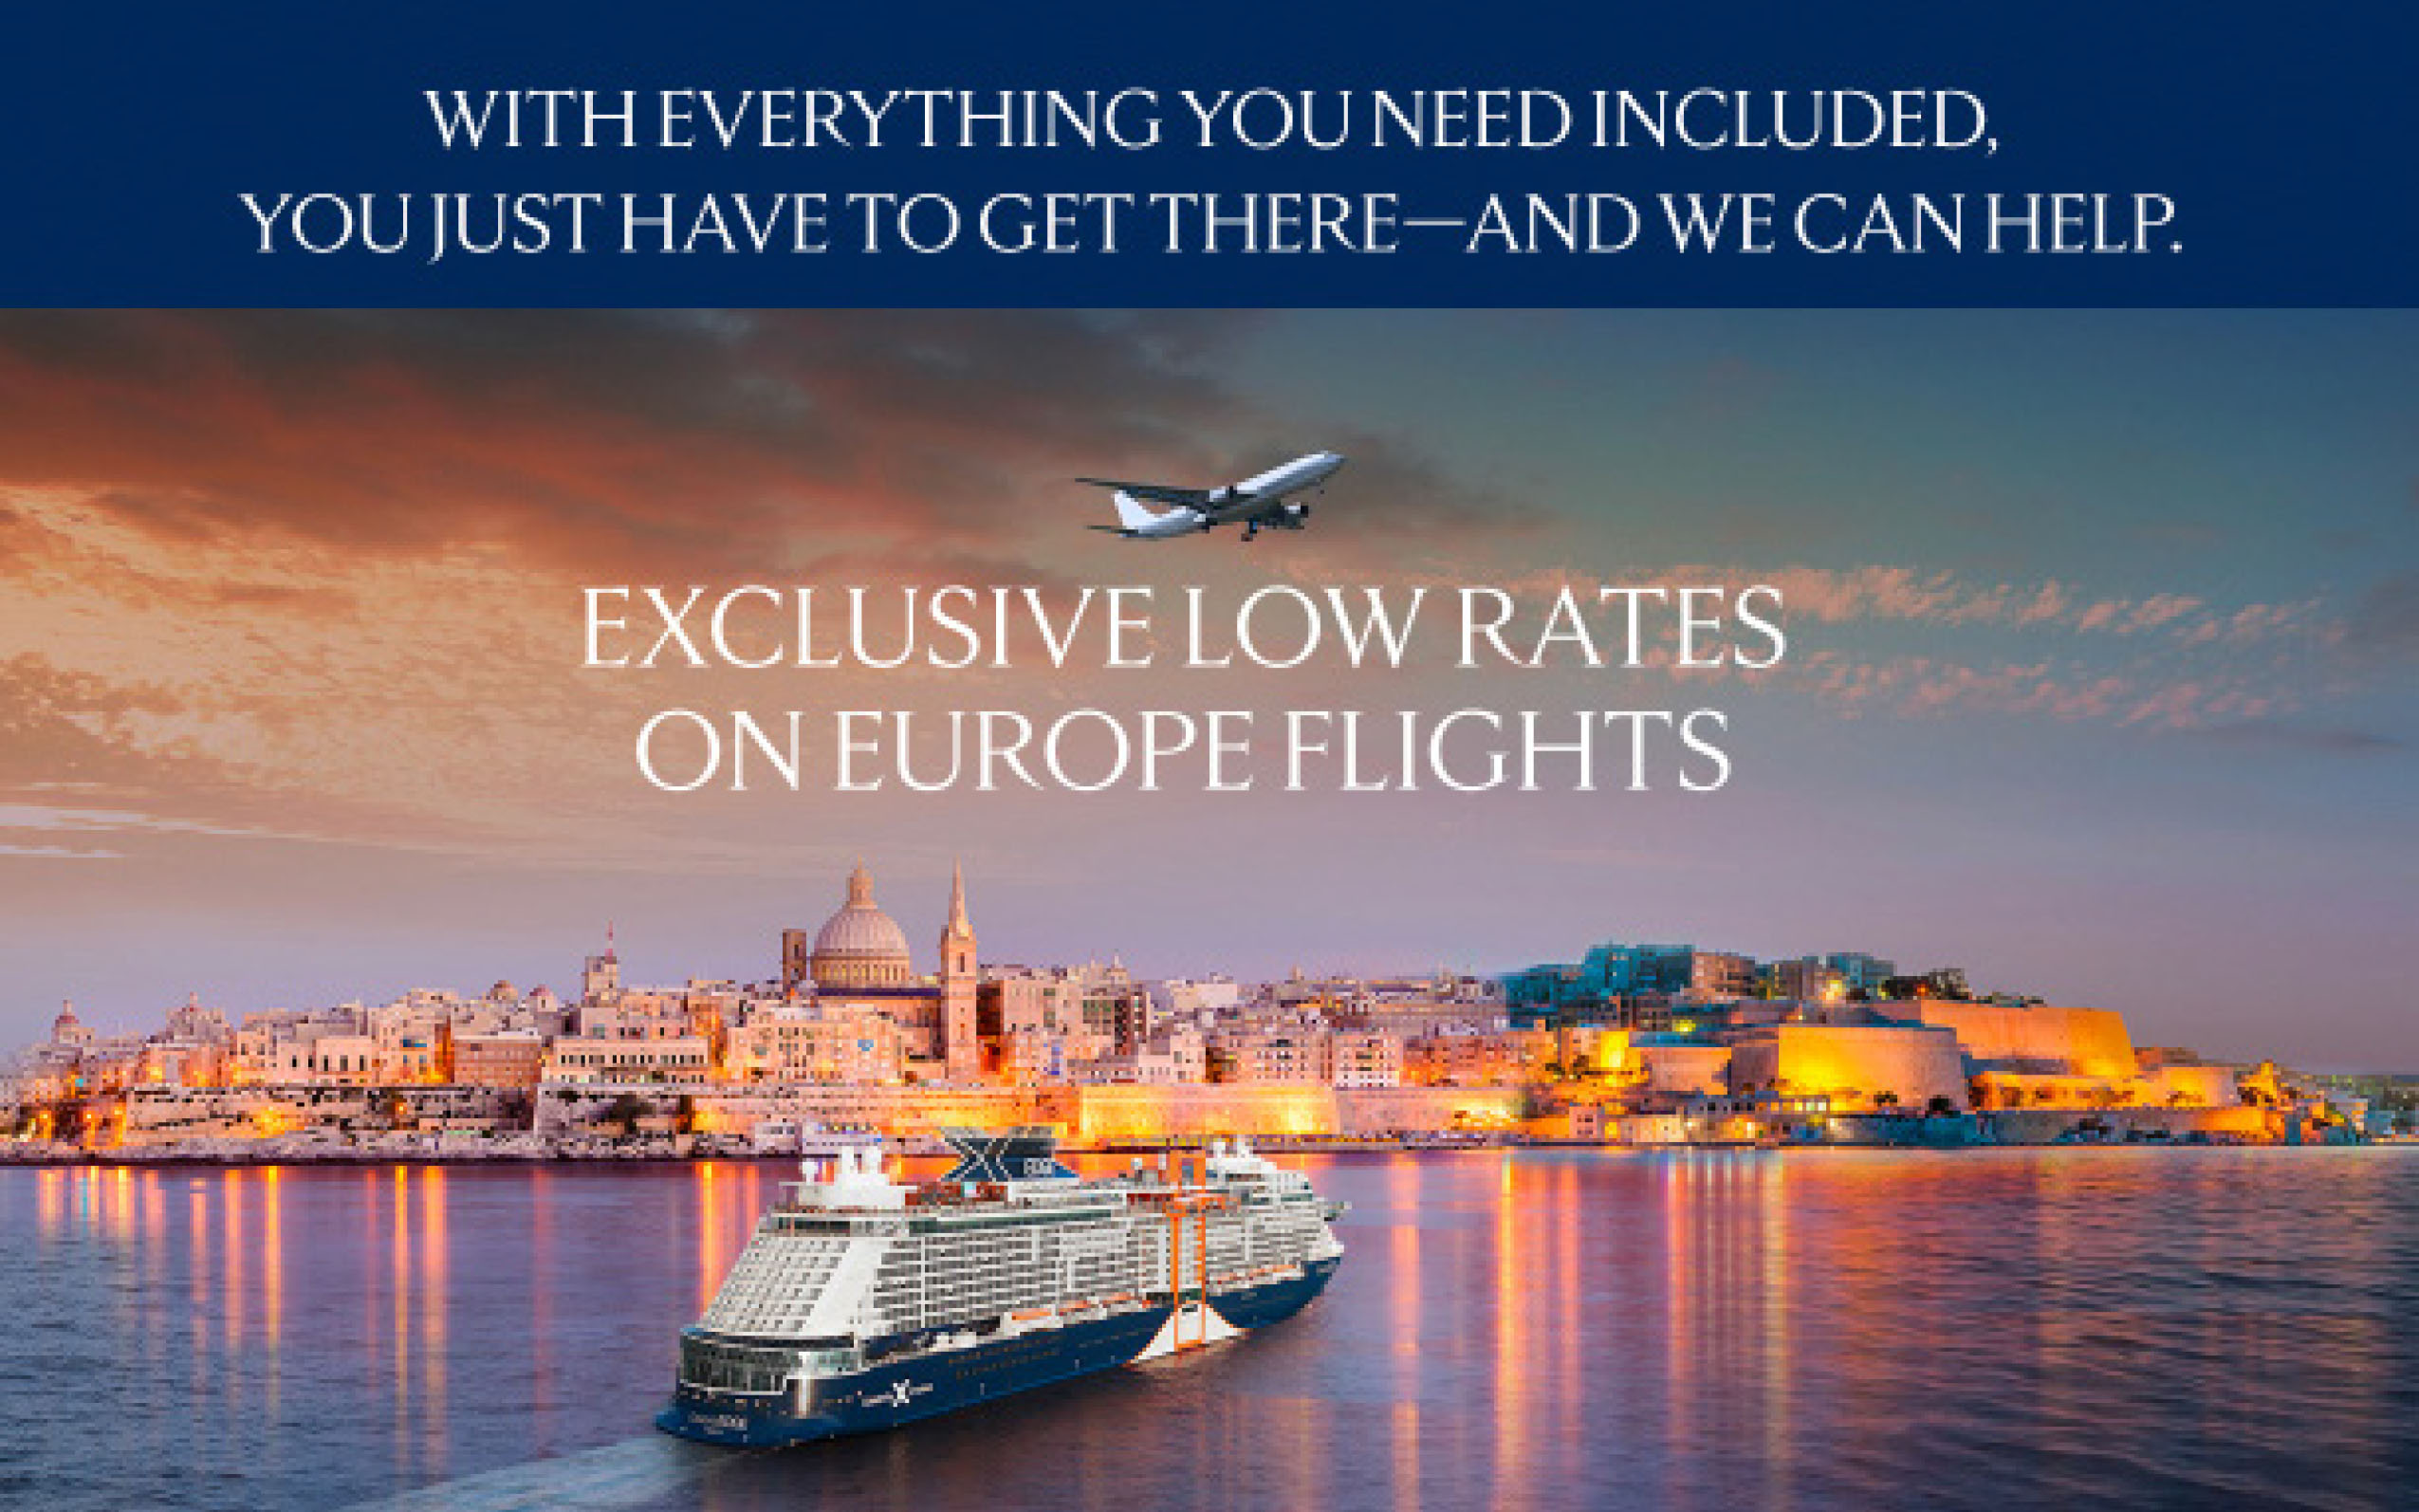 Exclusive Low Rates on Europe Flights with Celebrity Cruises